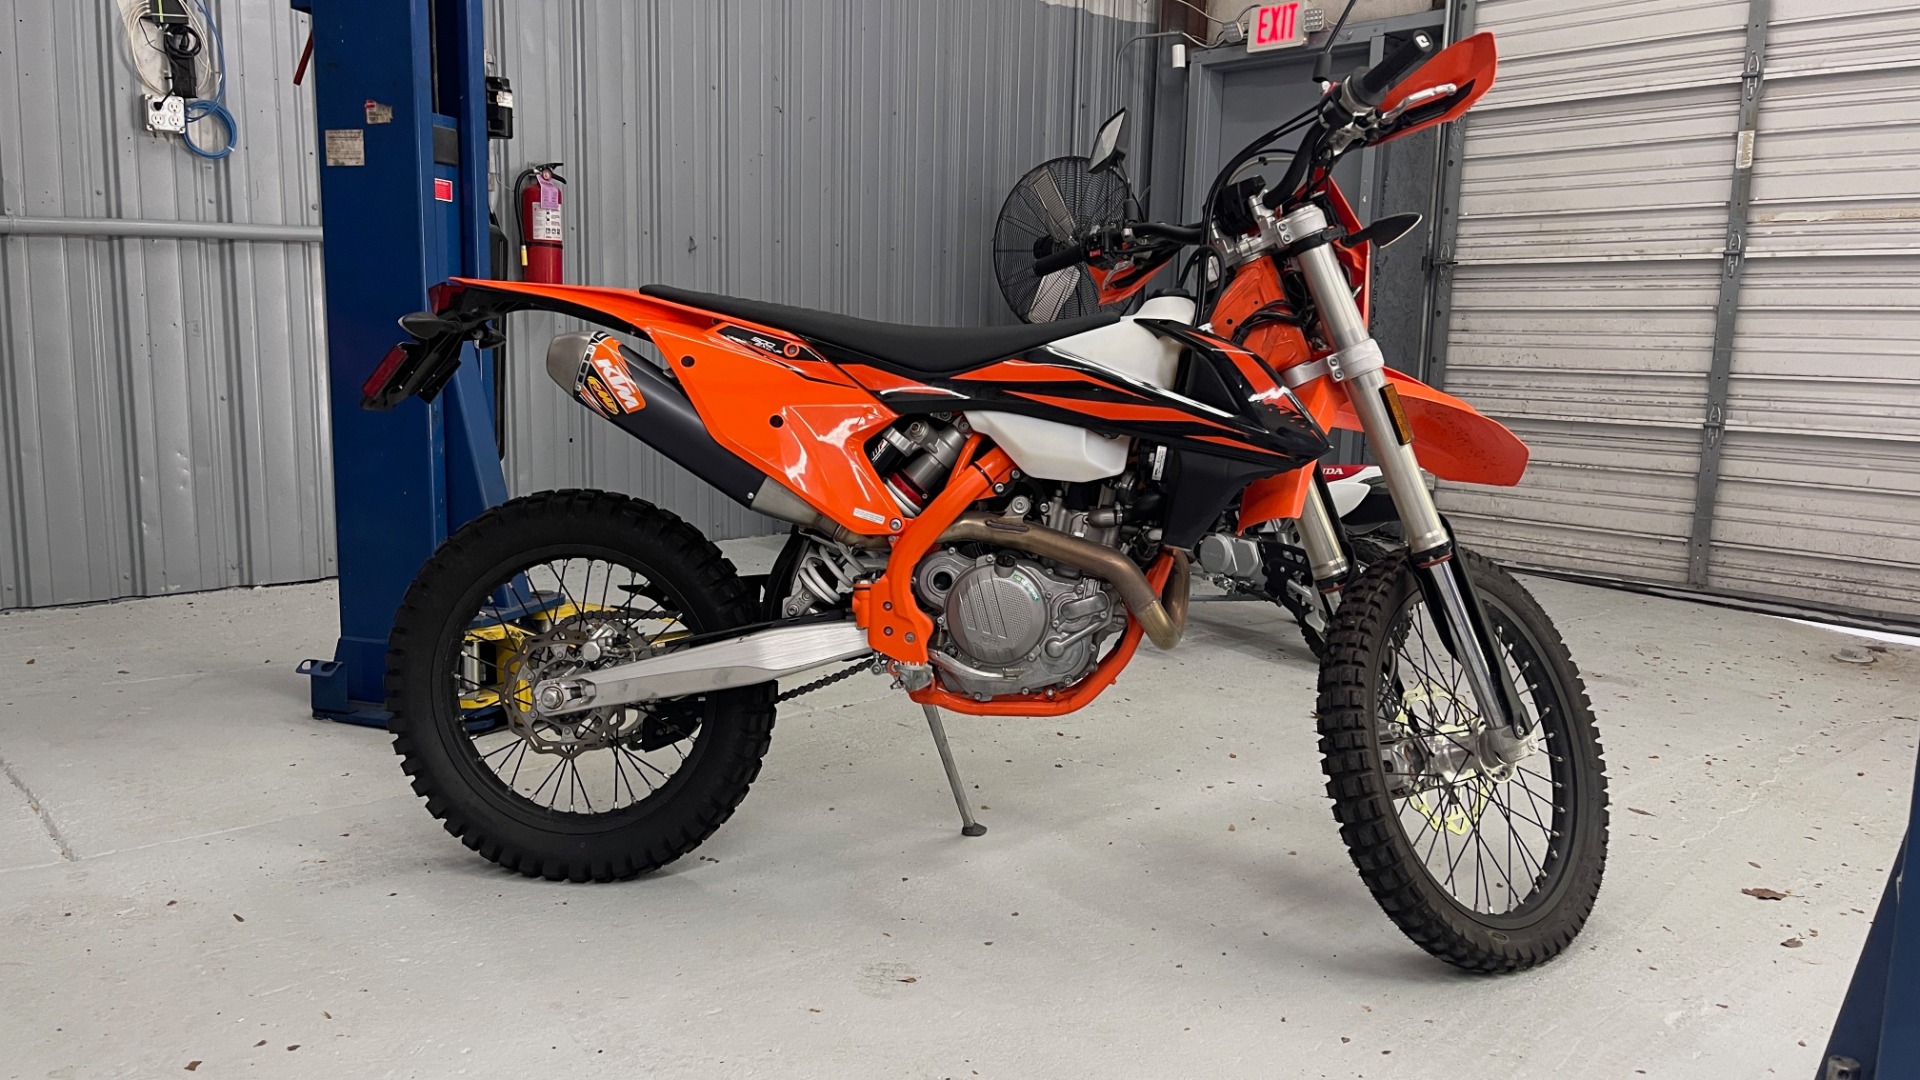 Used 2019 KTM 500 EXC-F DUAL PURPOSE DIRT BIKE / 4-STROKE / EFI / ELECTRIC START / 6-SPEED for sale $11,000 at Formula Imports in Charlotte NC 28227 2